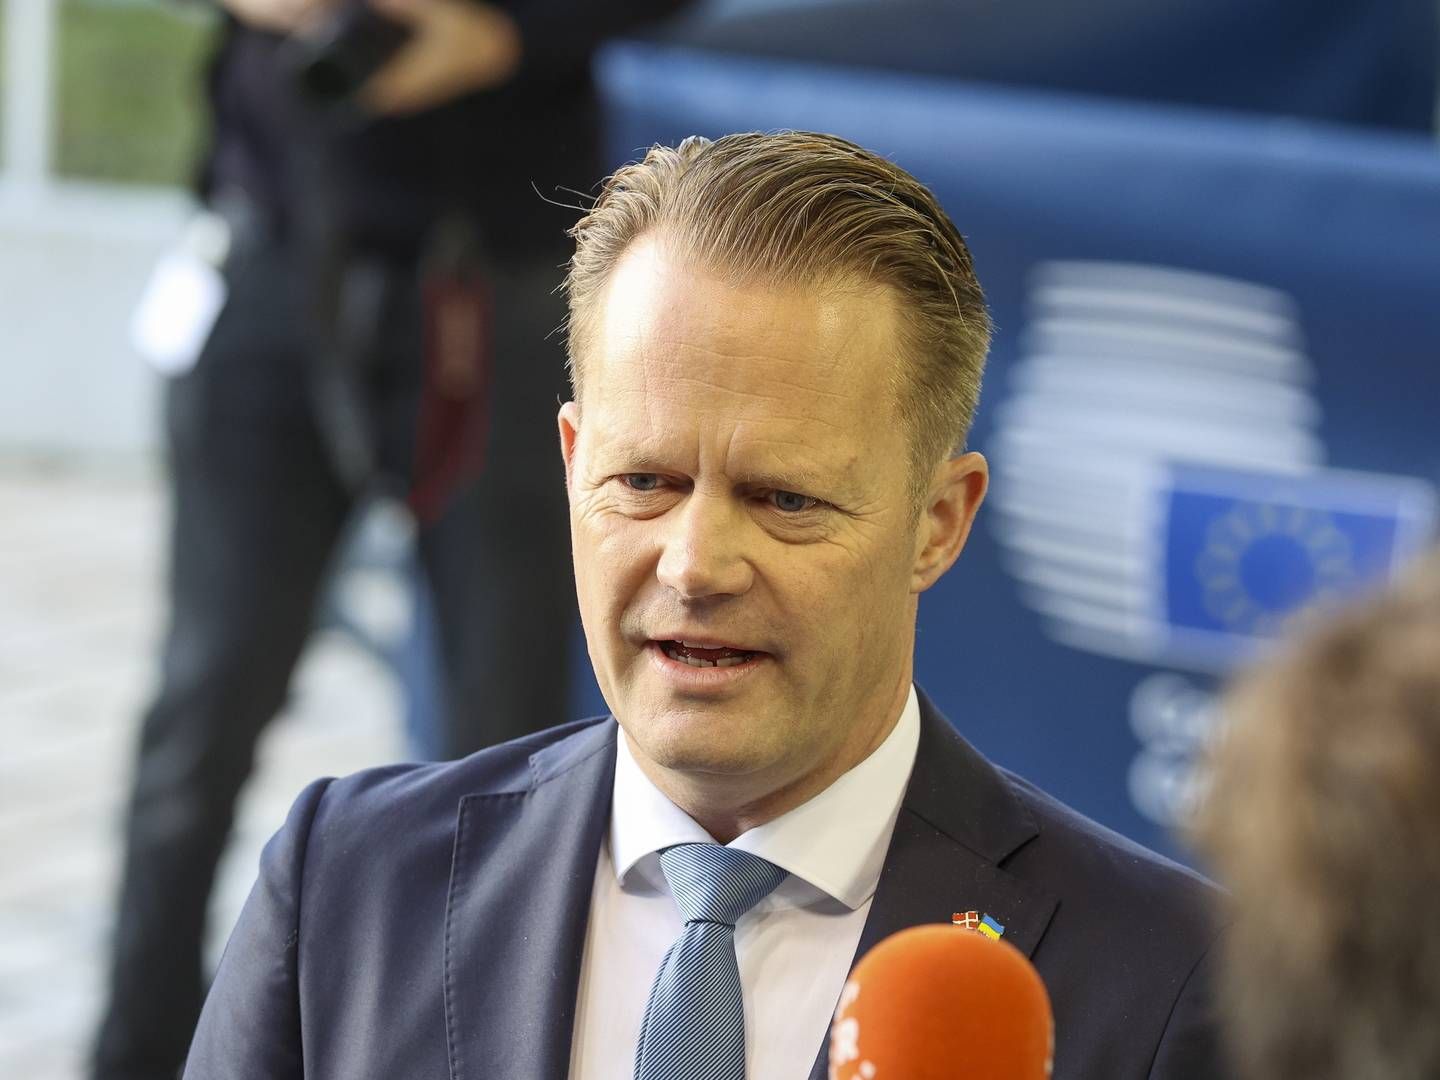 Danish Minister of Foreign Affairs Jeppe Kofod says the EU is prepared to introduce additional sanctions against Russia. | Photo: Julien Warnand/EPA / EPA